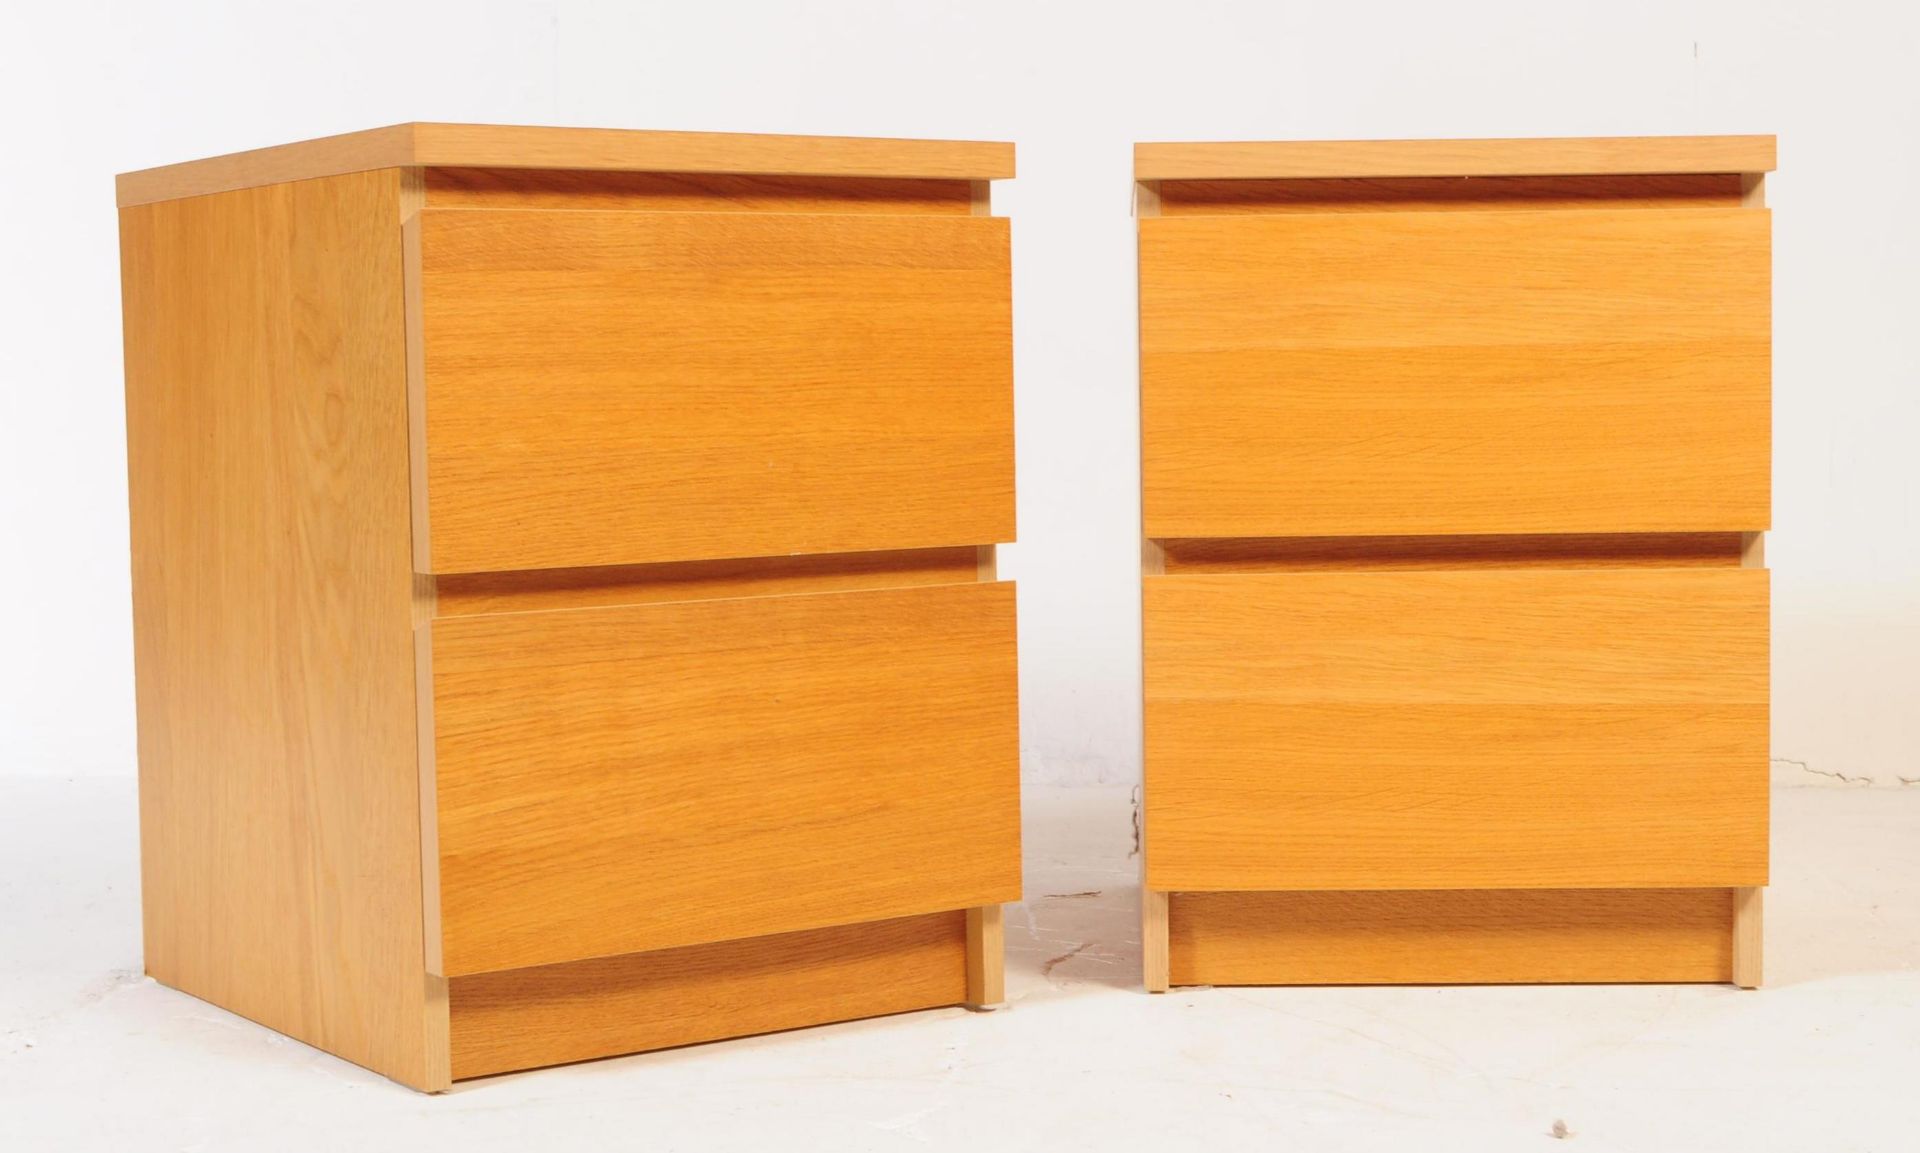 IKEA MALM - PAIR OF 20TH CENTURY BEECH BEDSIDES - Image 2 of 6